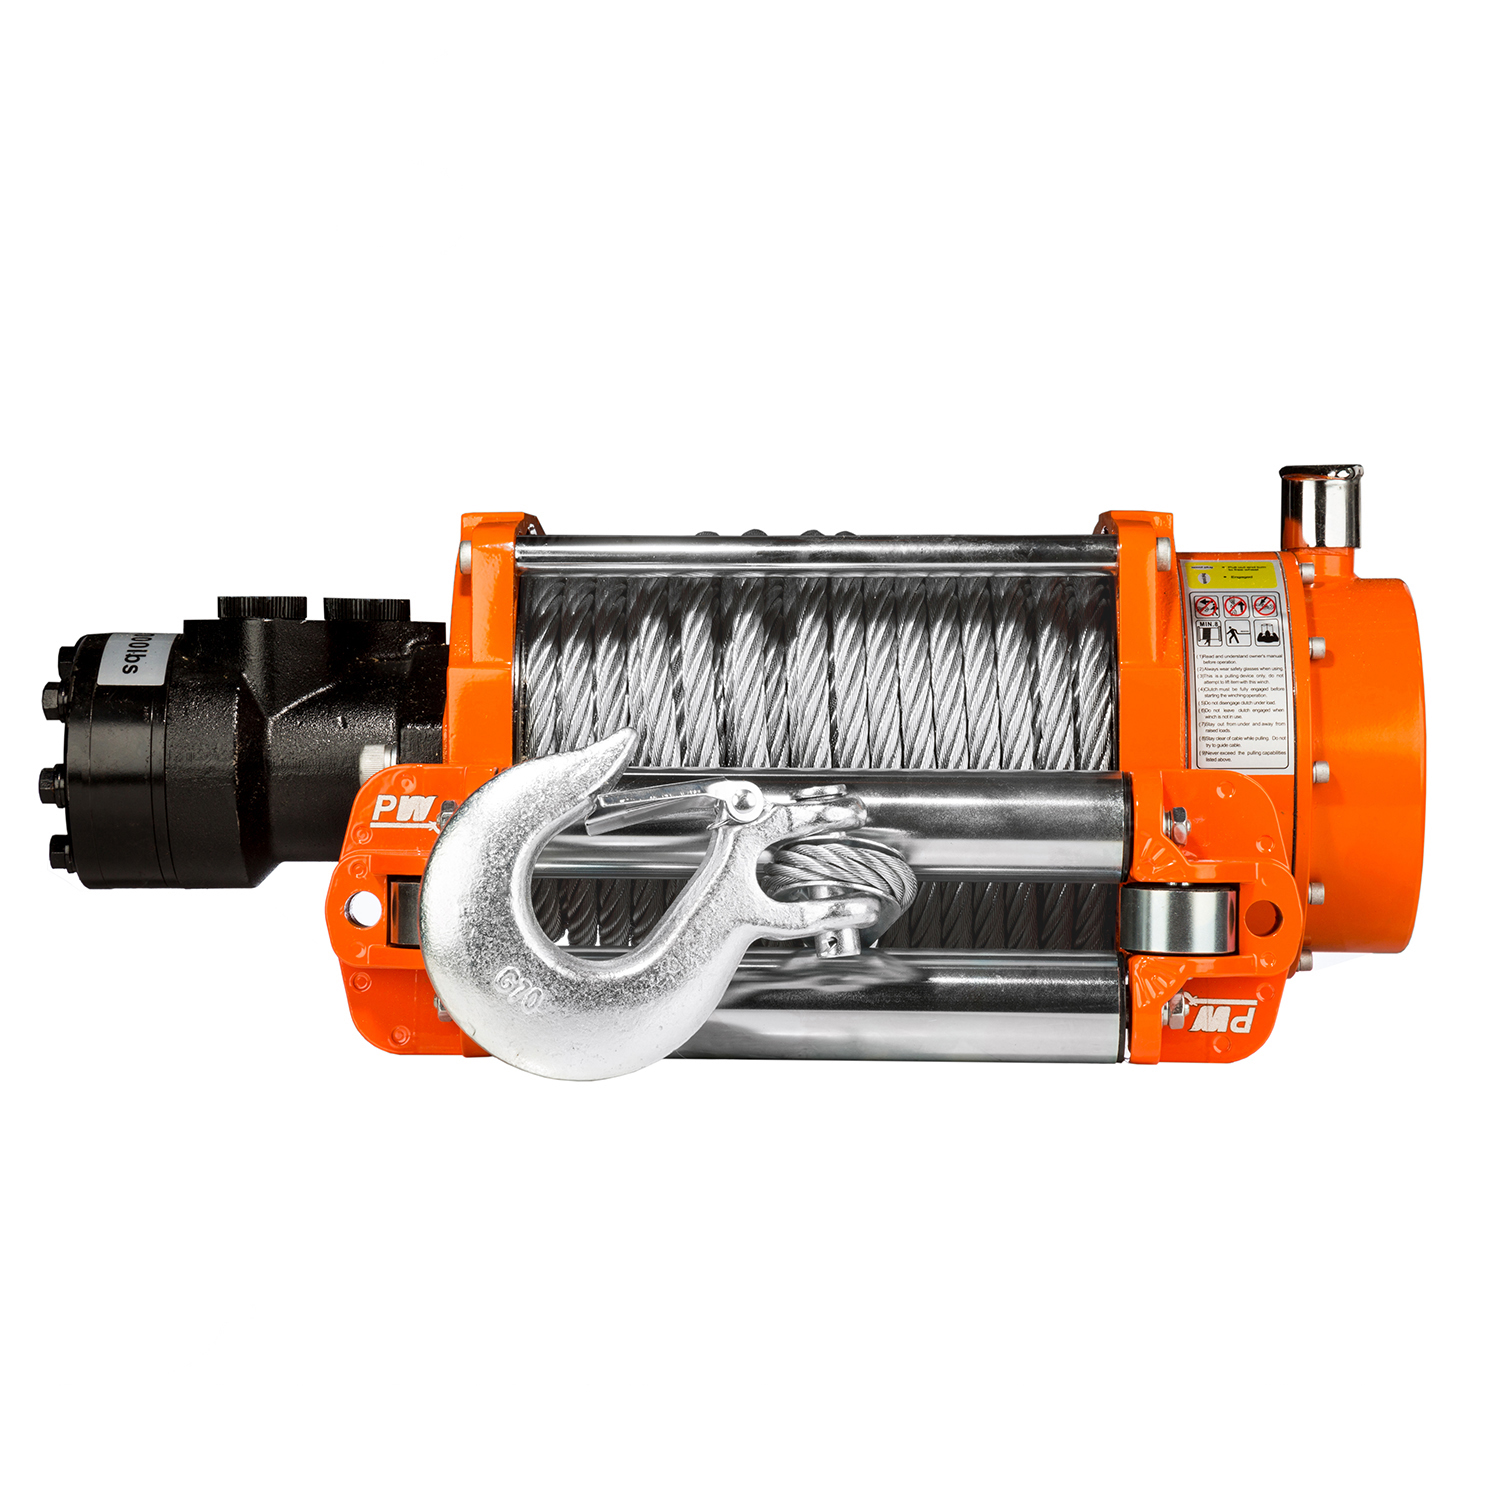 Machinery Manufacturing Winches and Hoists Prowinch LLC